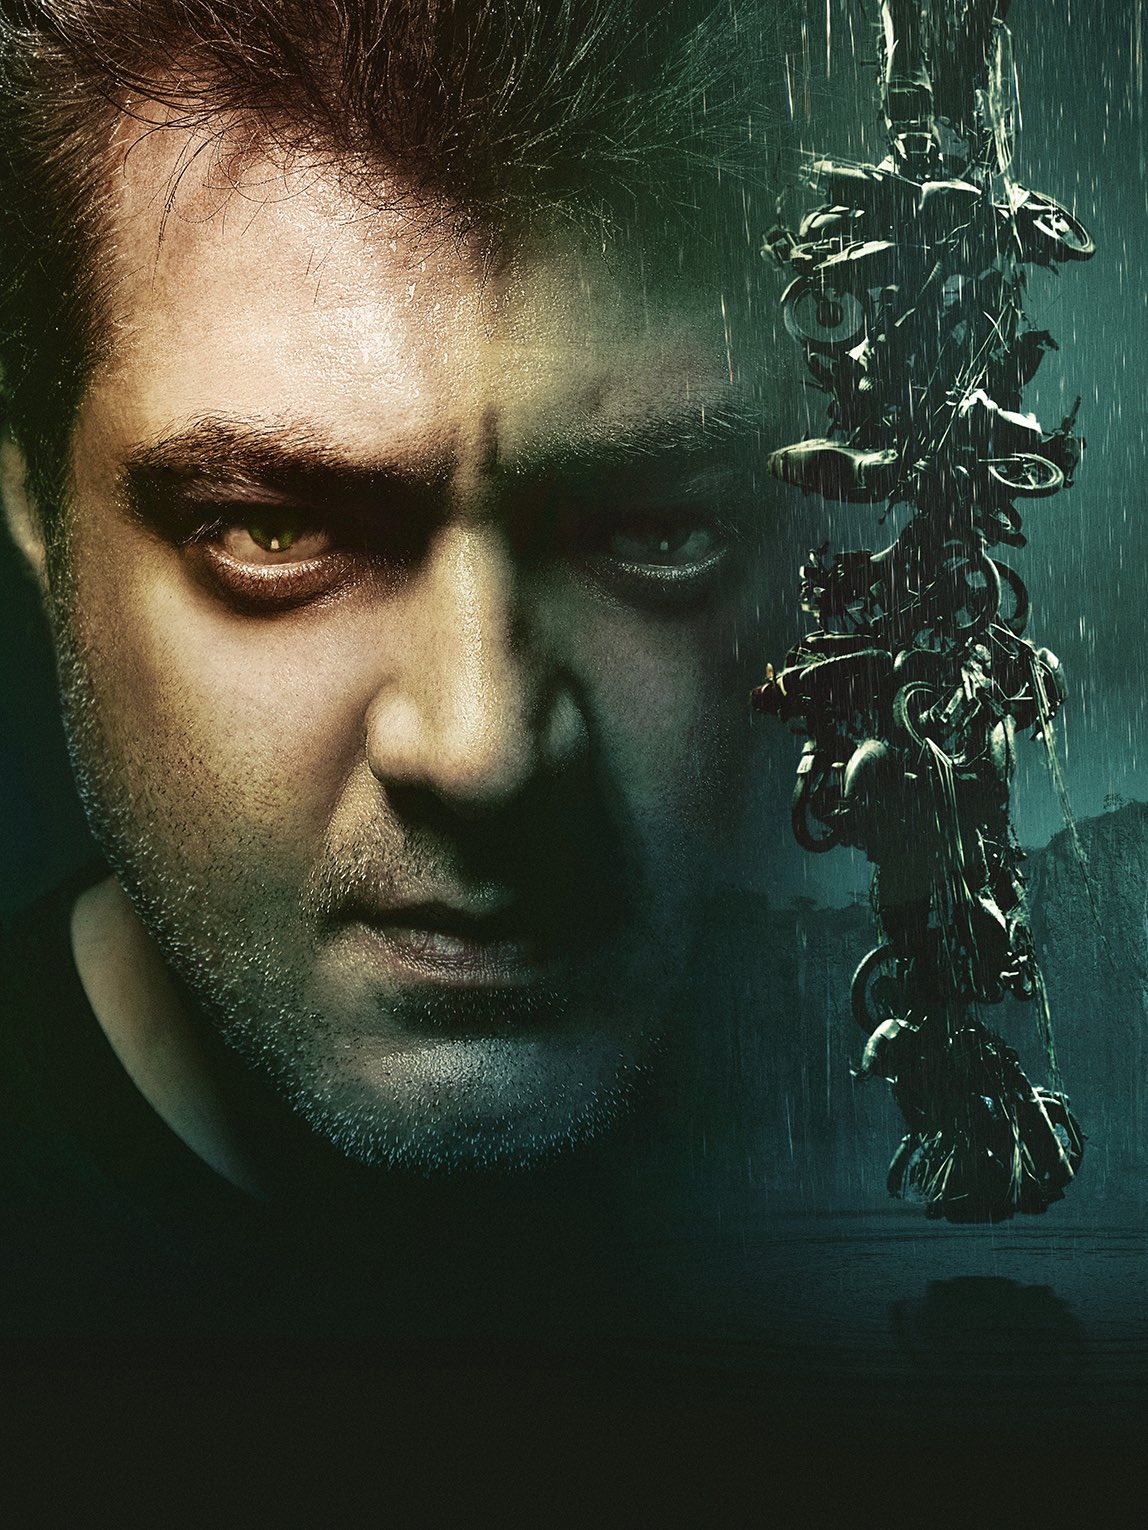 New poster from Thala Ajith’s Valimai ft Karthikeya as villain takes the Internet by storm